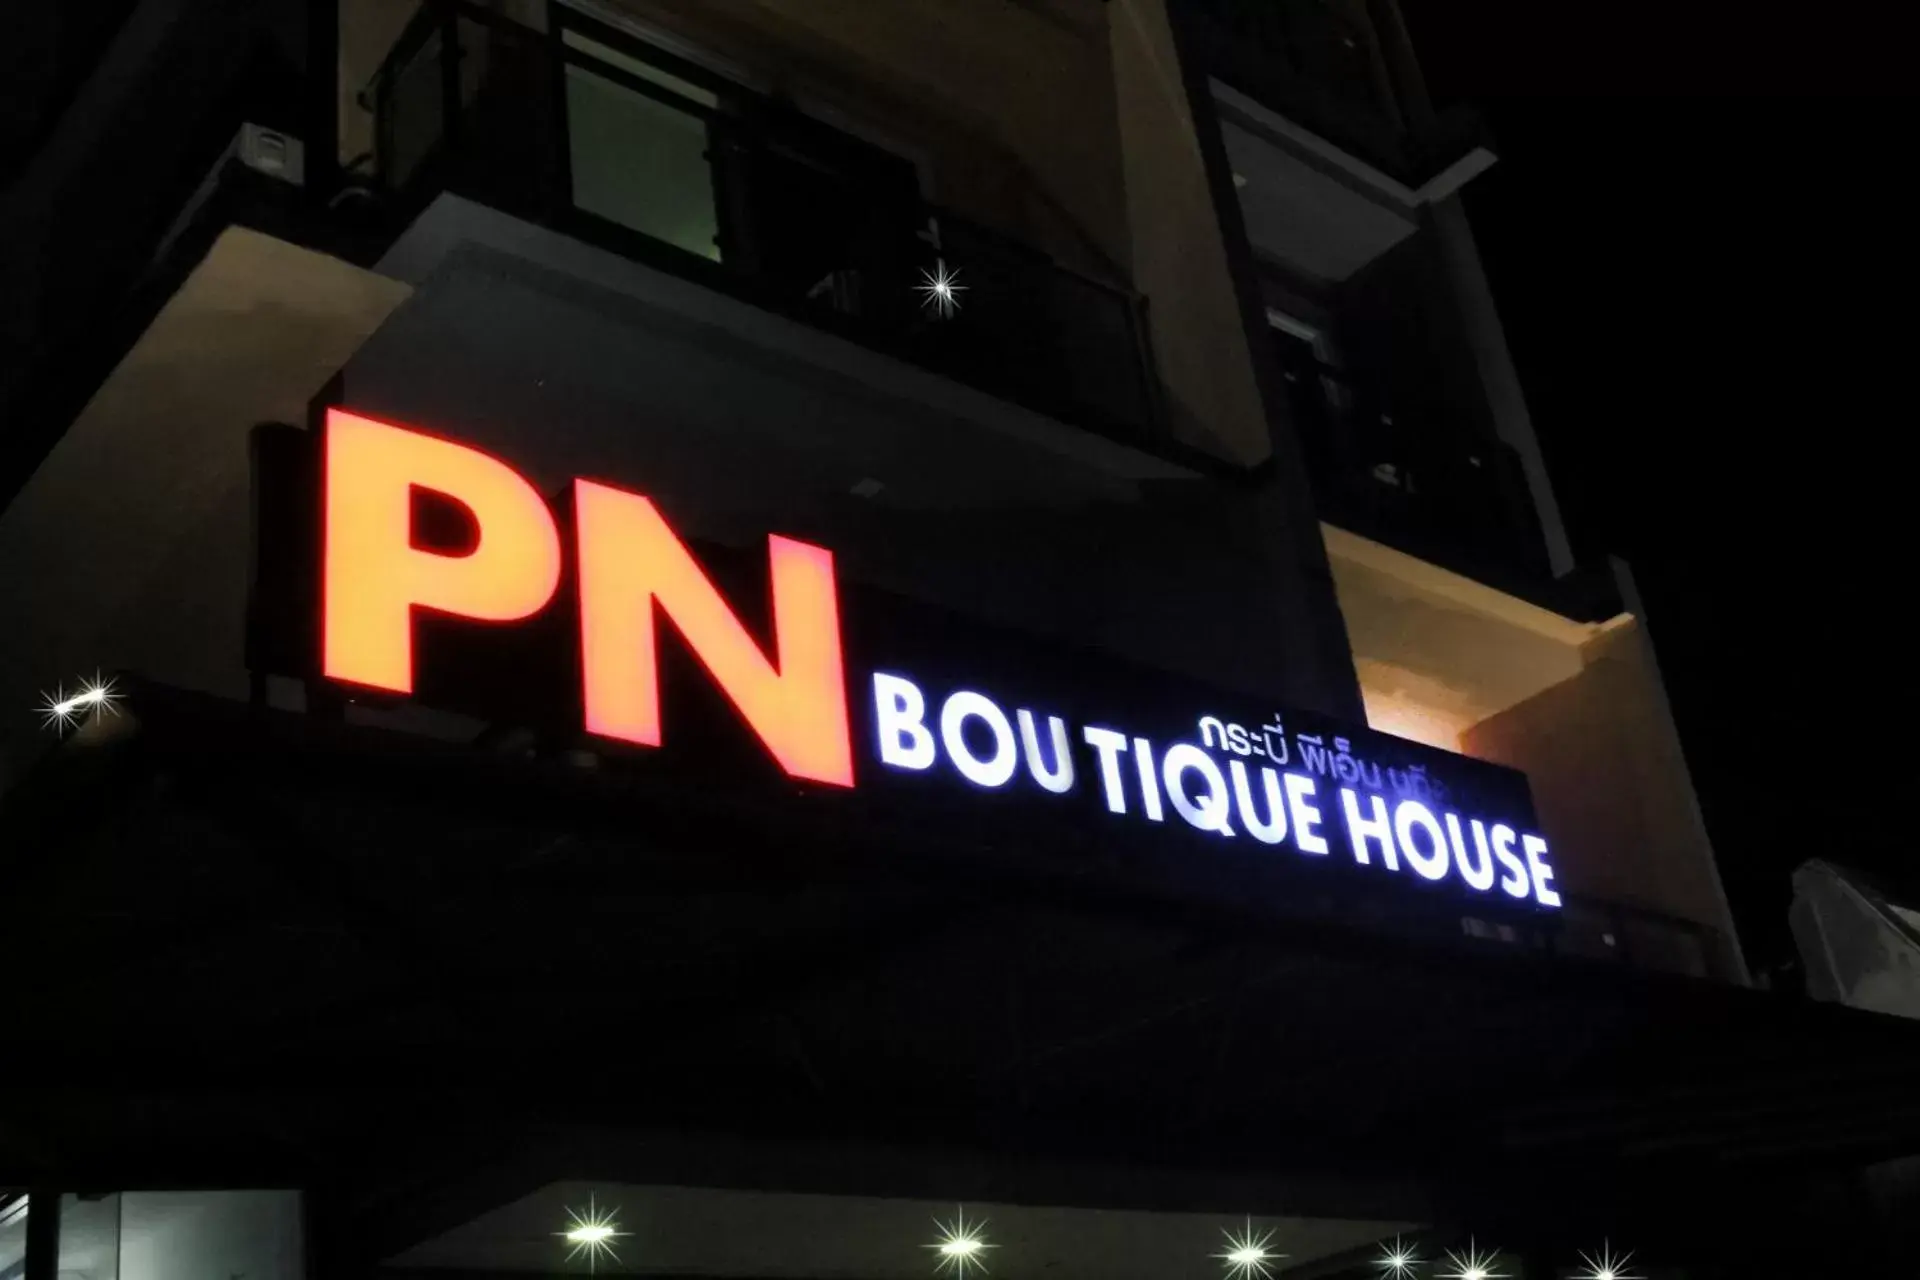 Property logo or sign in Krabi P.N. Boutique House